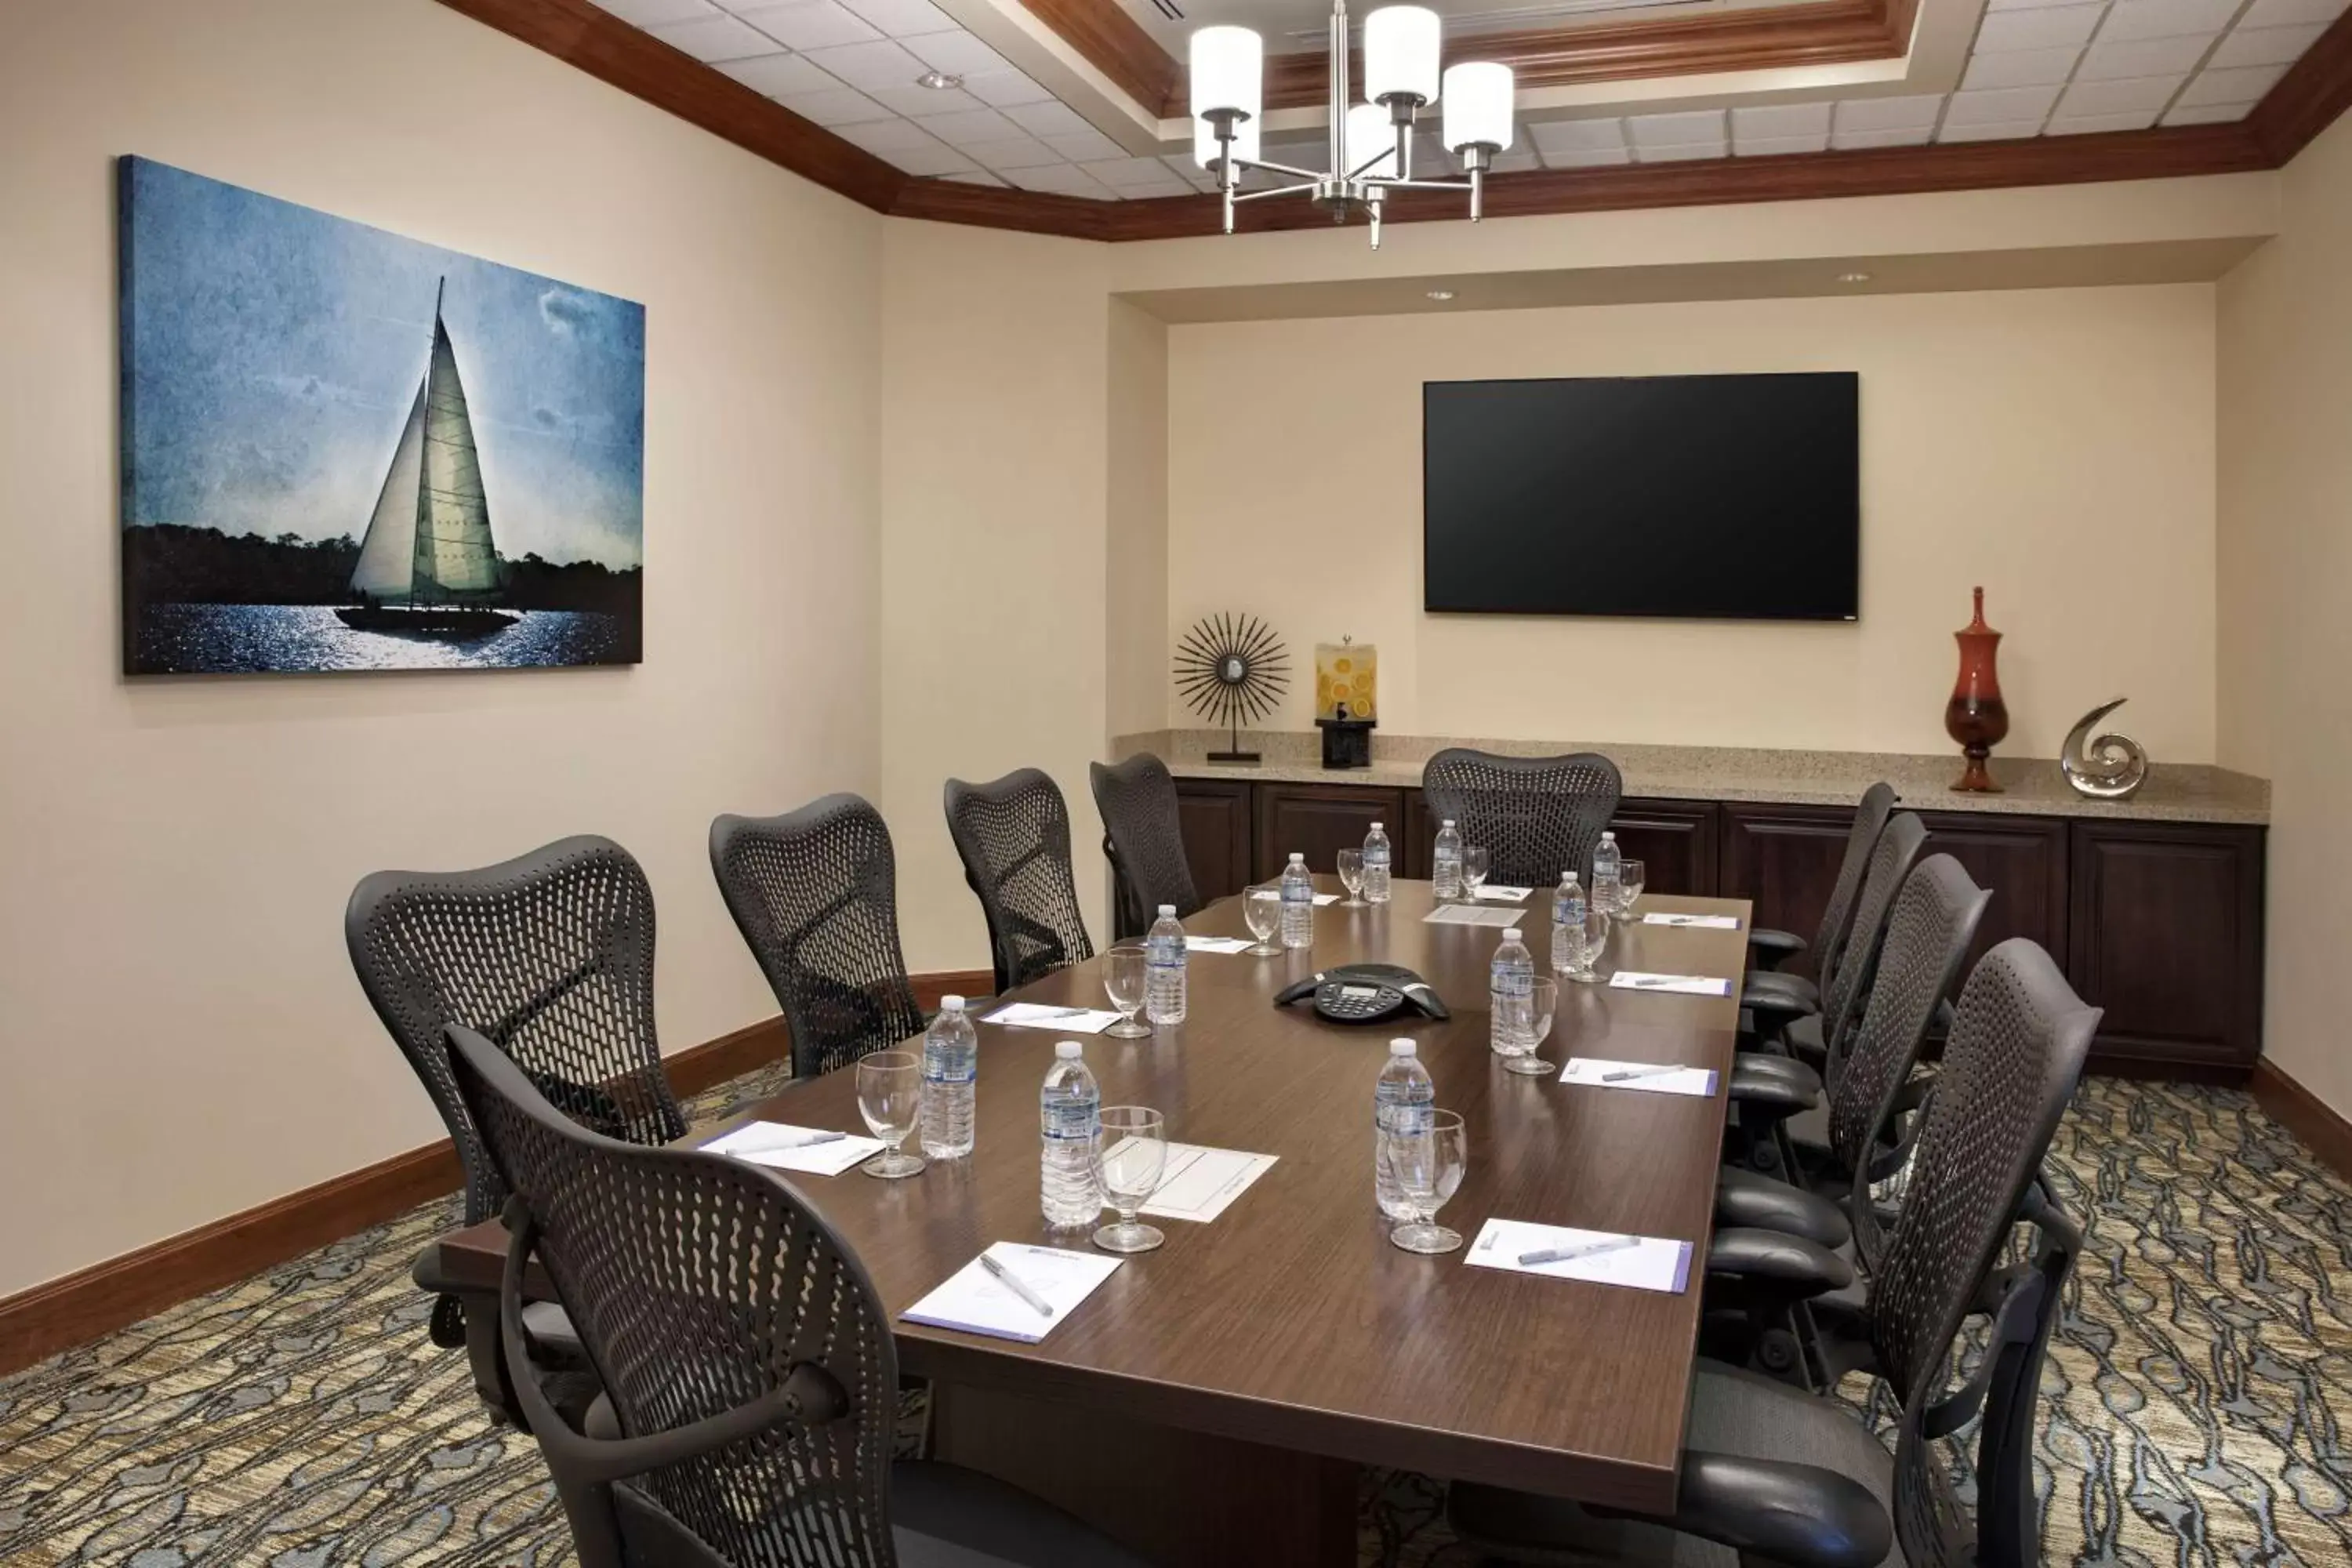 Meeting/conference room in Hampton Inn West Palm Beach Central Airport